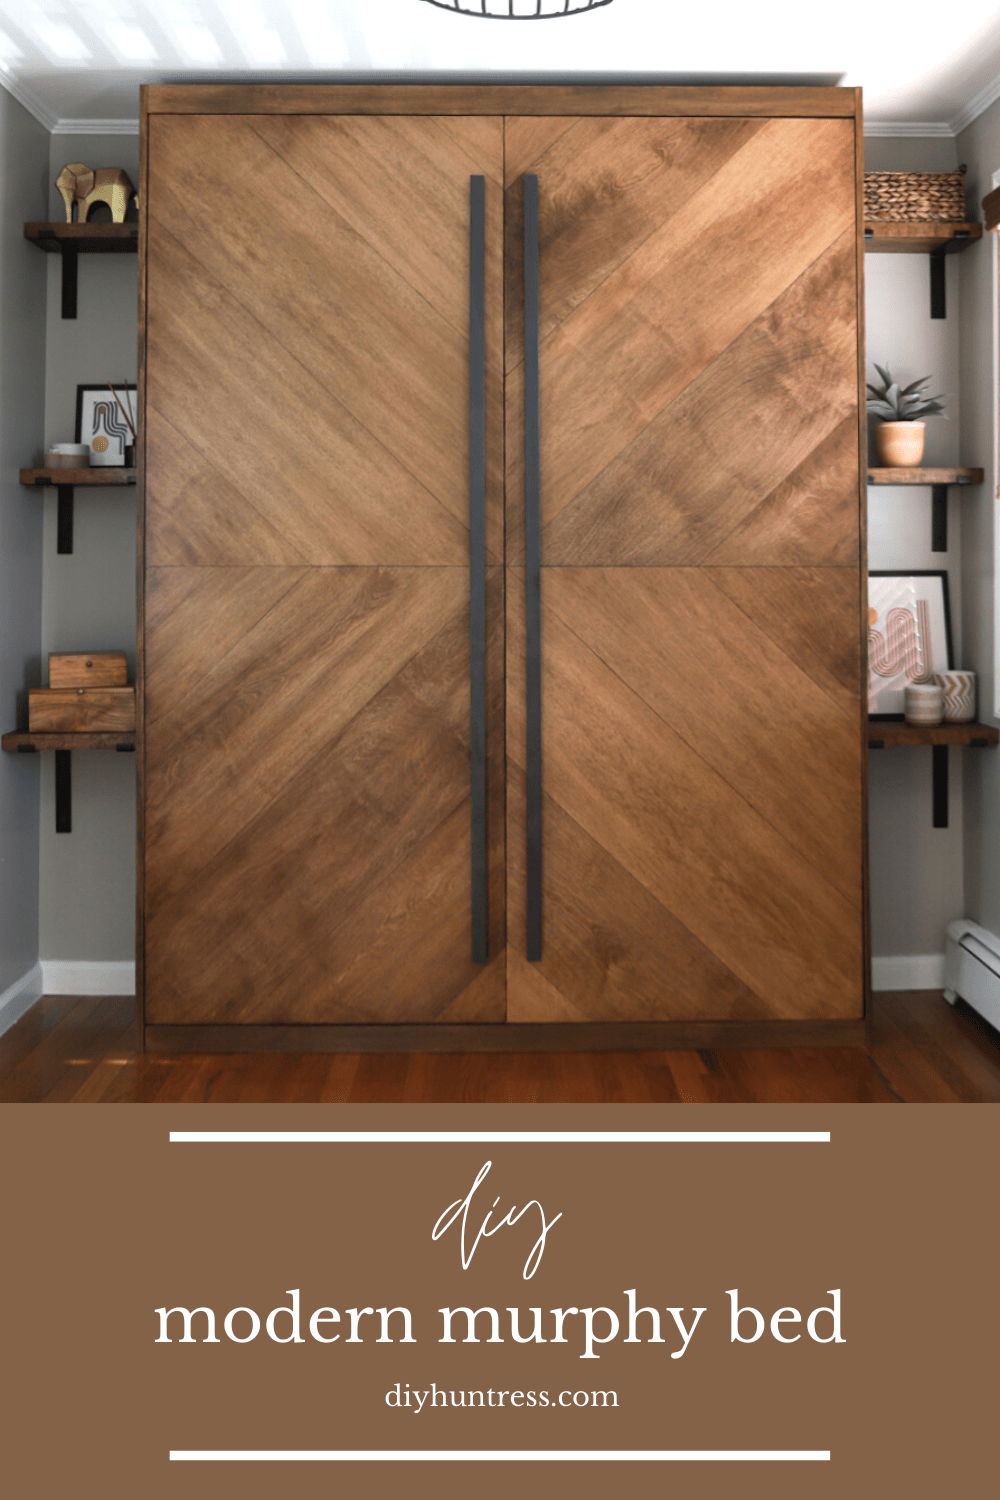 Murphy Bed Designs: Maximize Space with Stylish and Functional Murphy Bed Designs